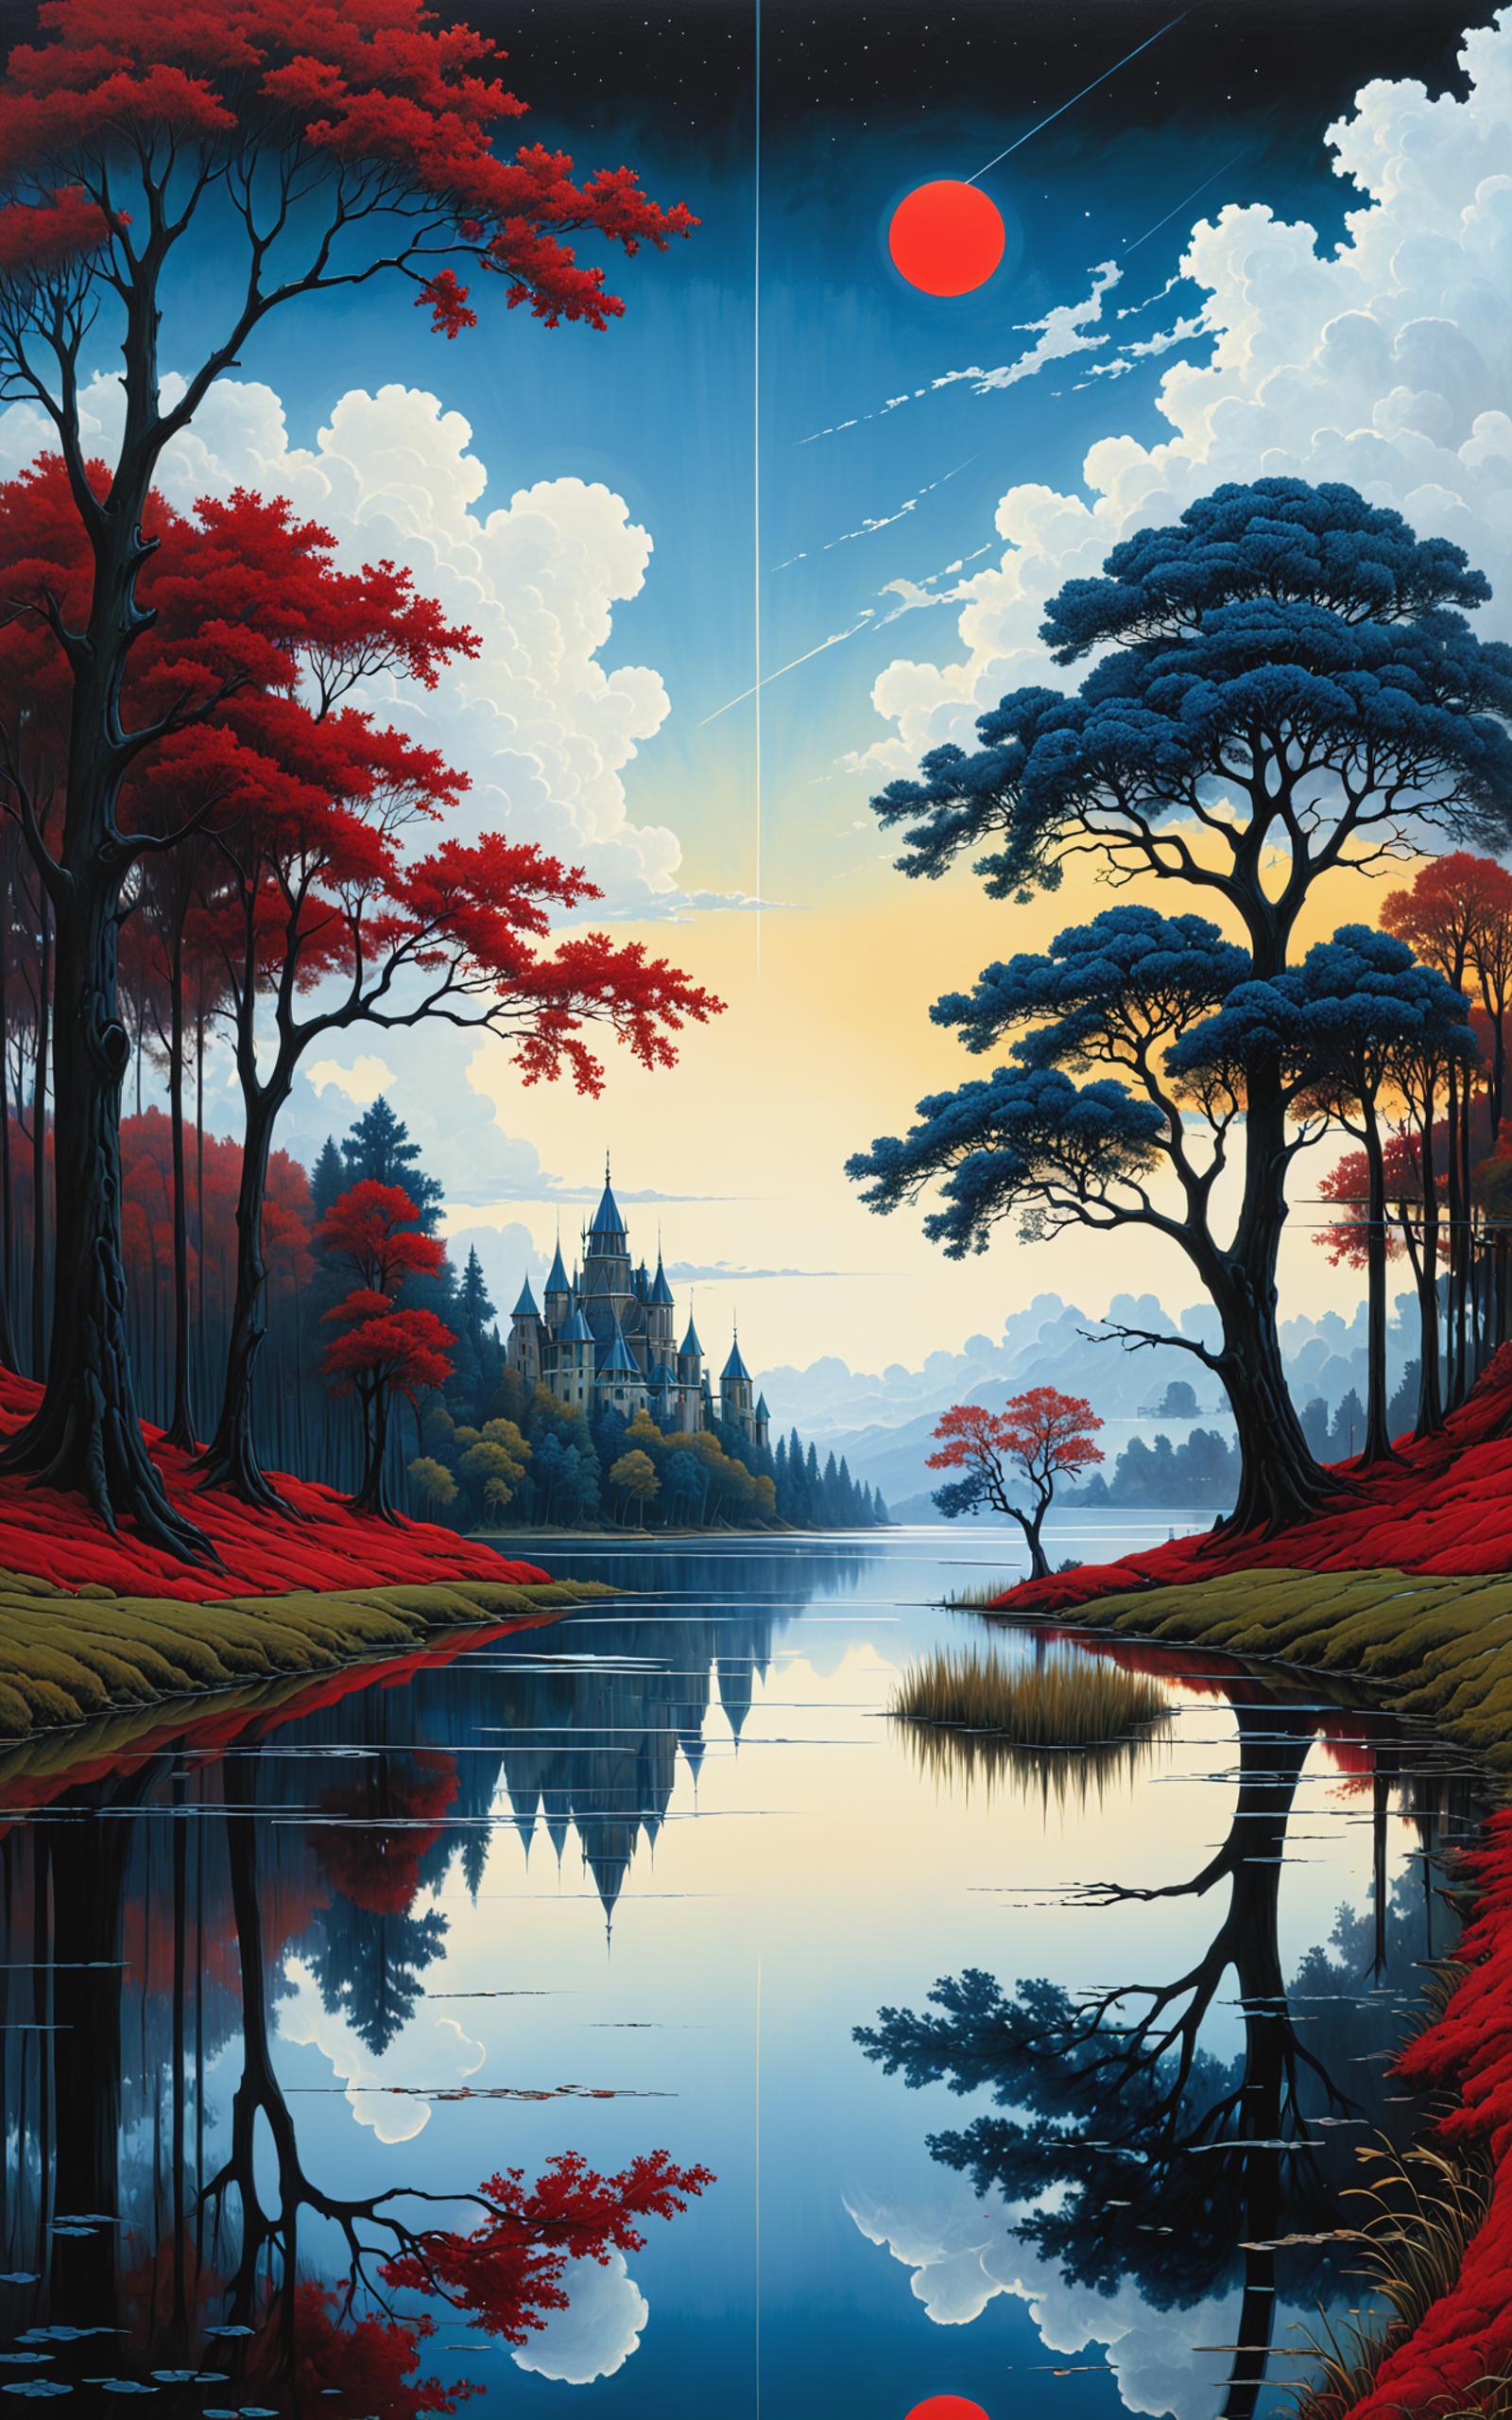 A Painting of a Castle, Trees, and Lake at Sunset